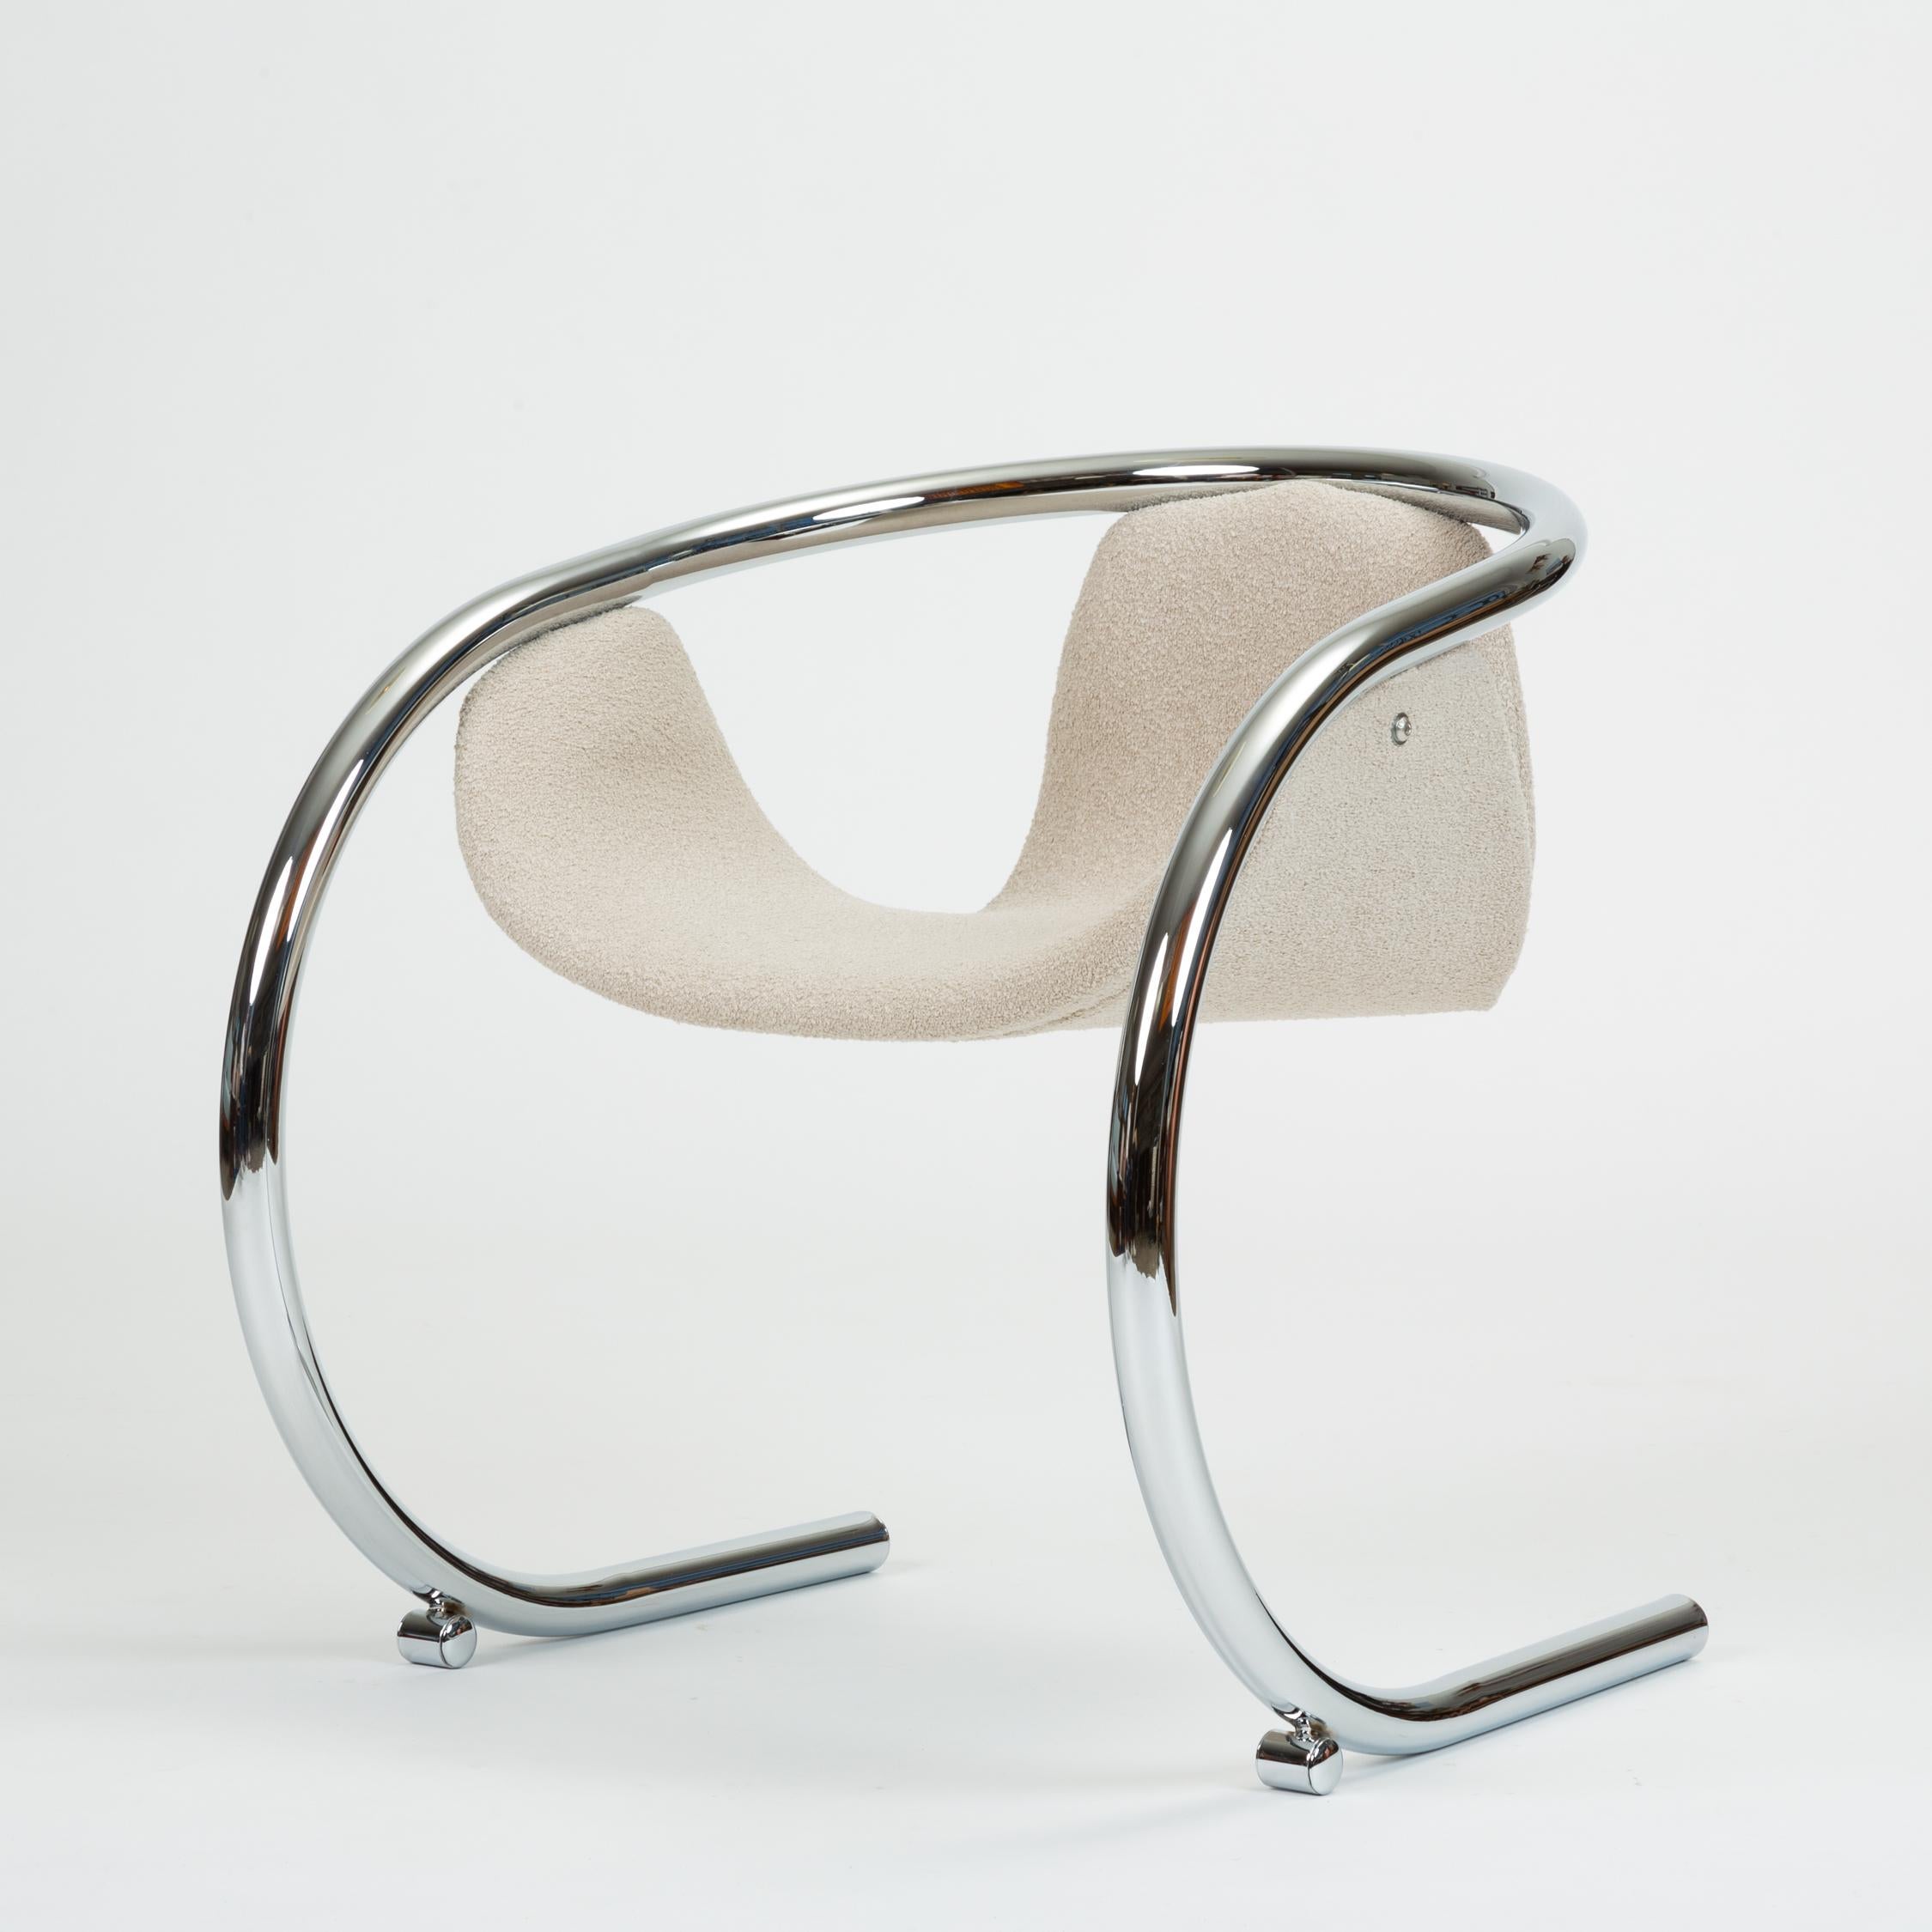 American Pair of Cantilevered Lounge Chairs by Byron Botker for Landes